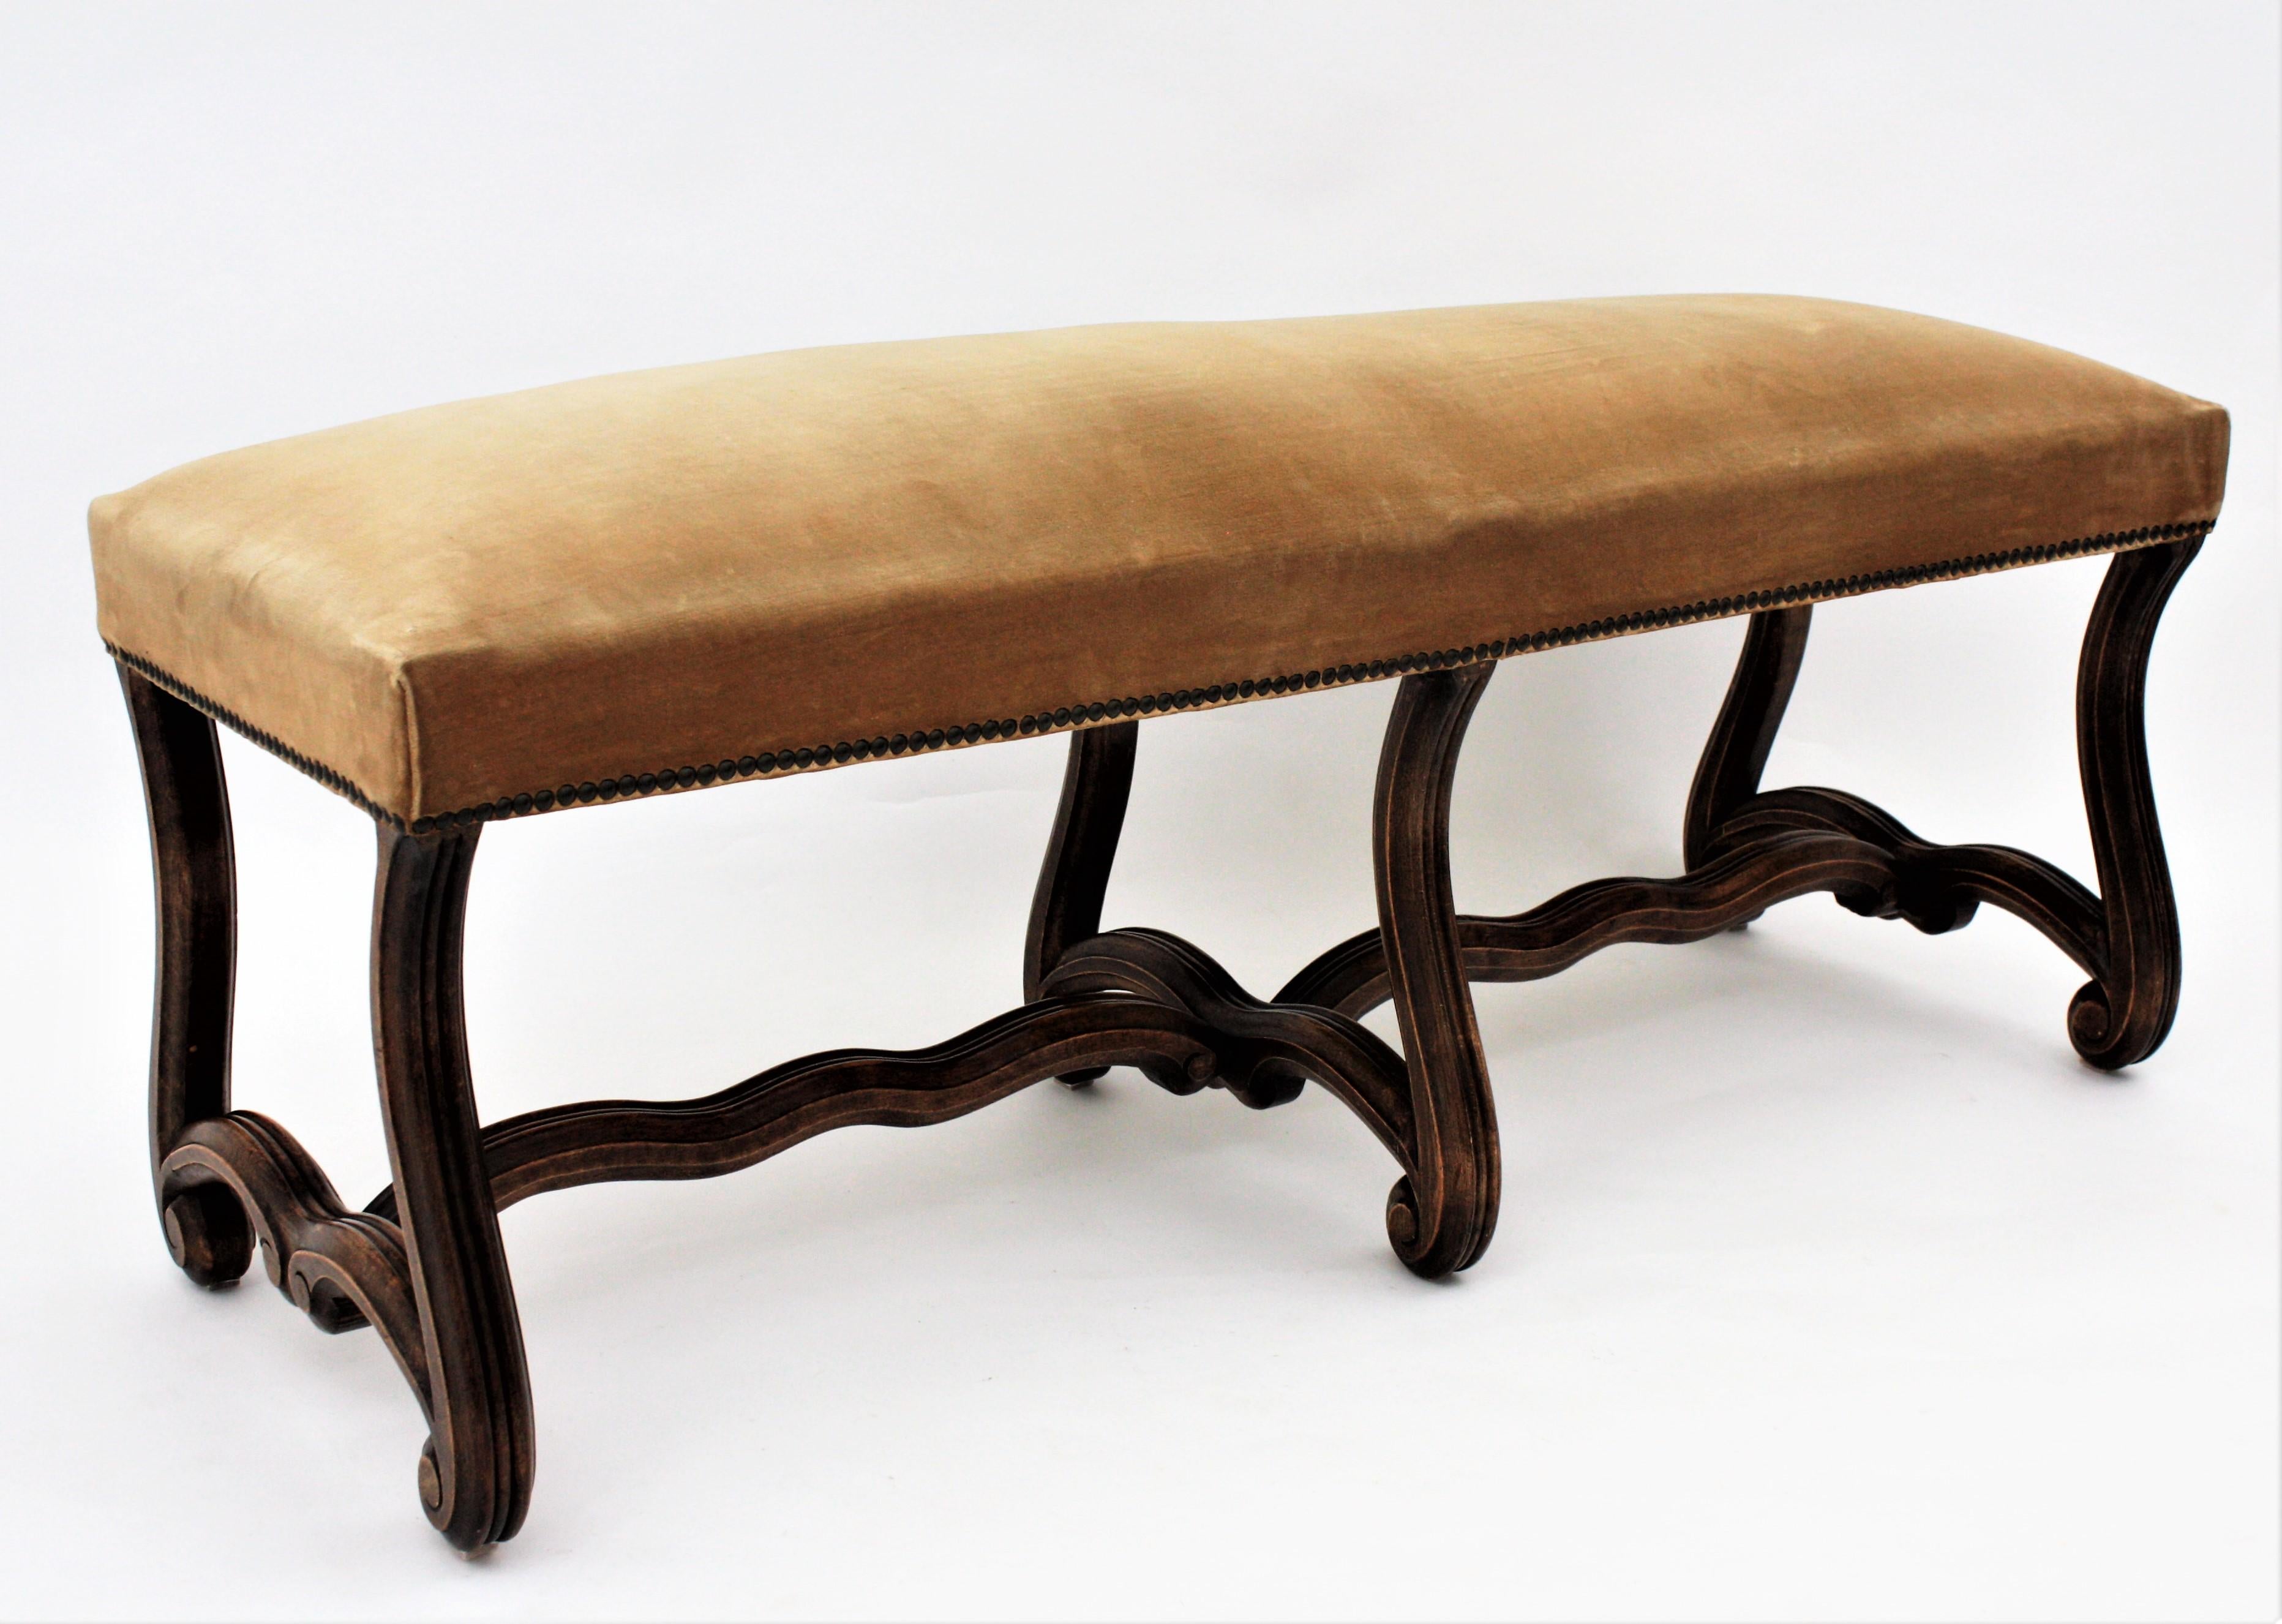 Hand-Carved French 1930s Louis XIV Style Os de Mouton Legs Bench in Velvet Upholstery